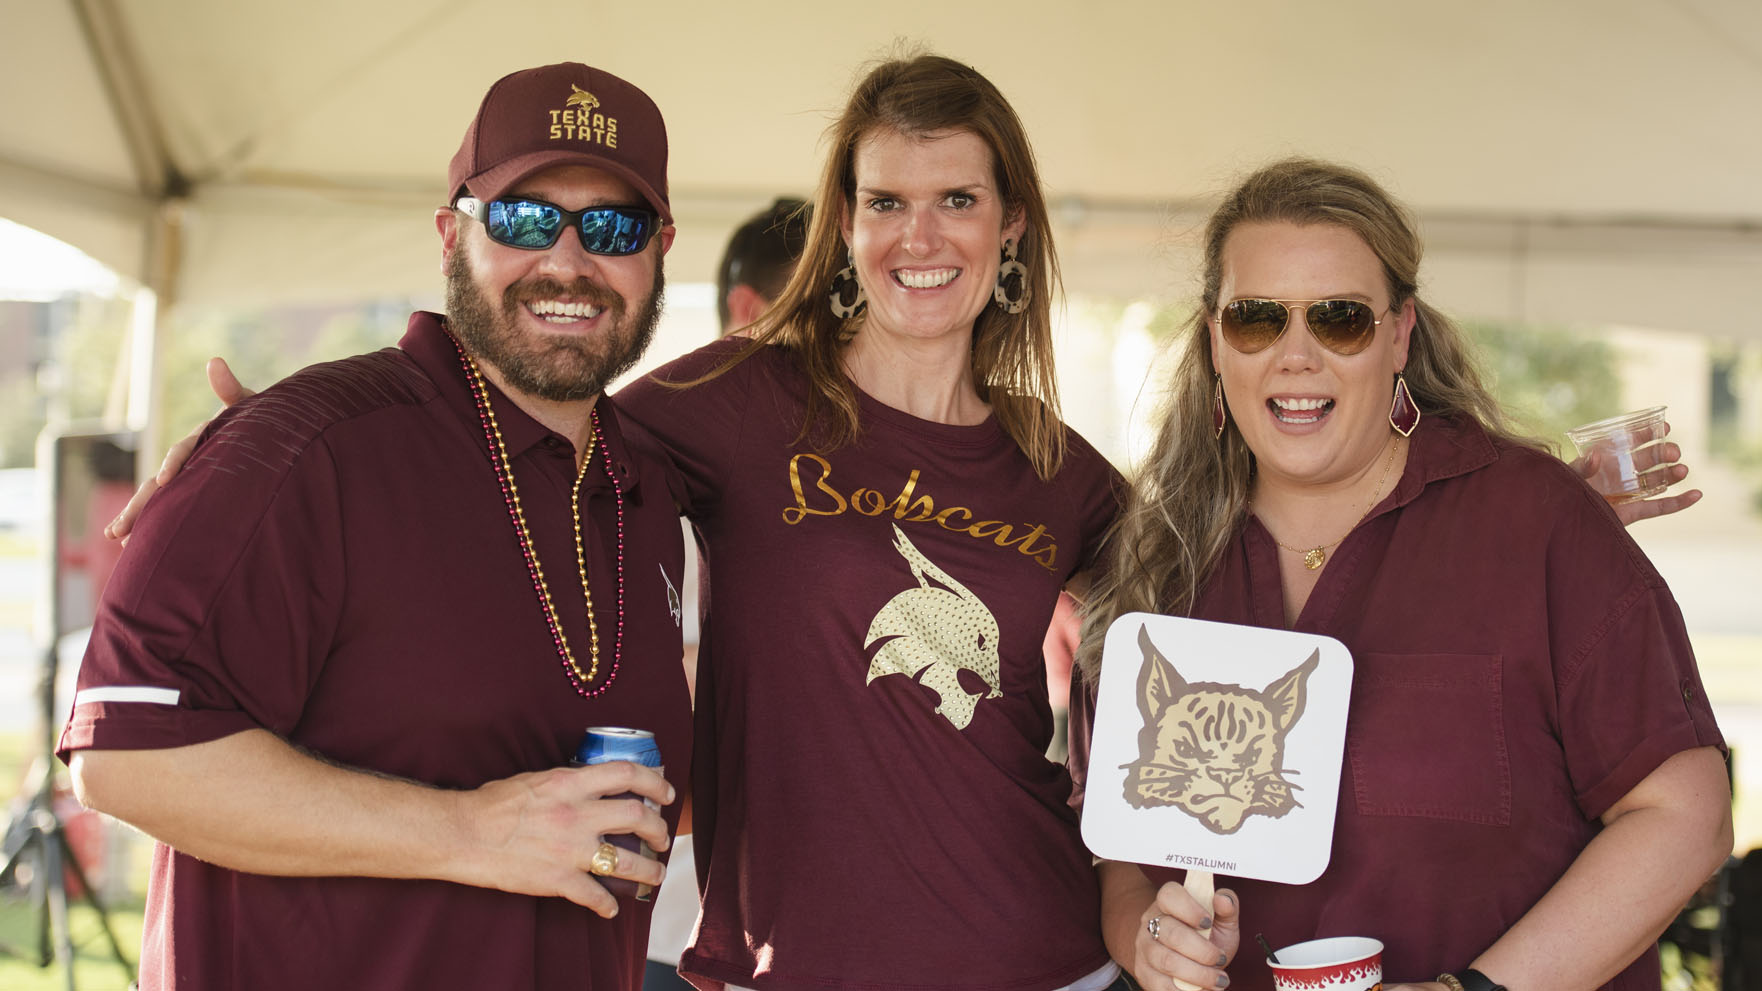 photo of three people, wearing Texas State gear, at a tailgate